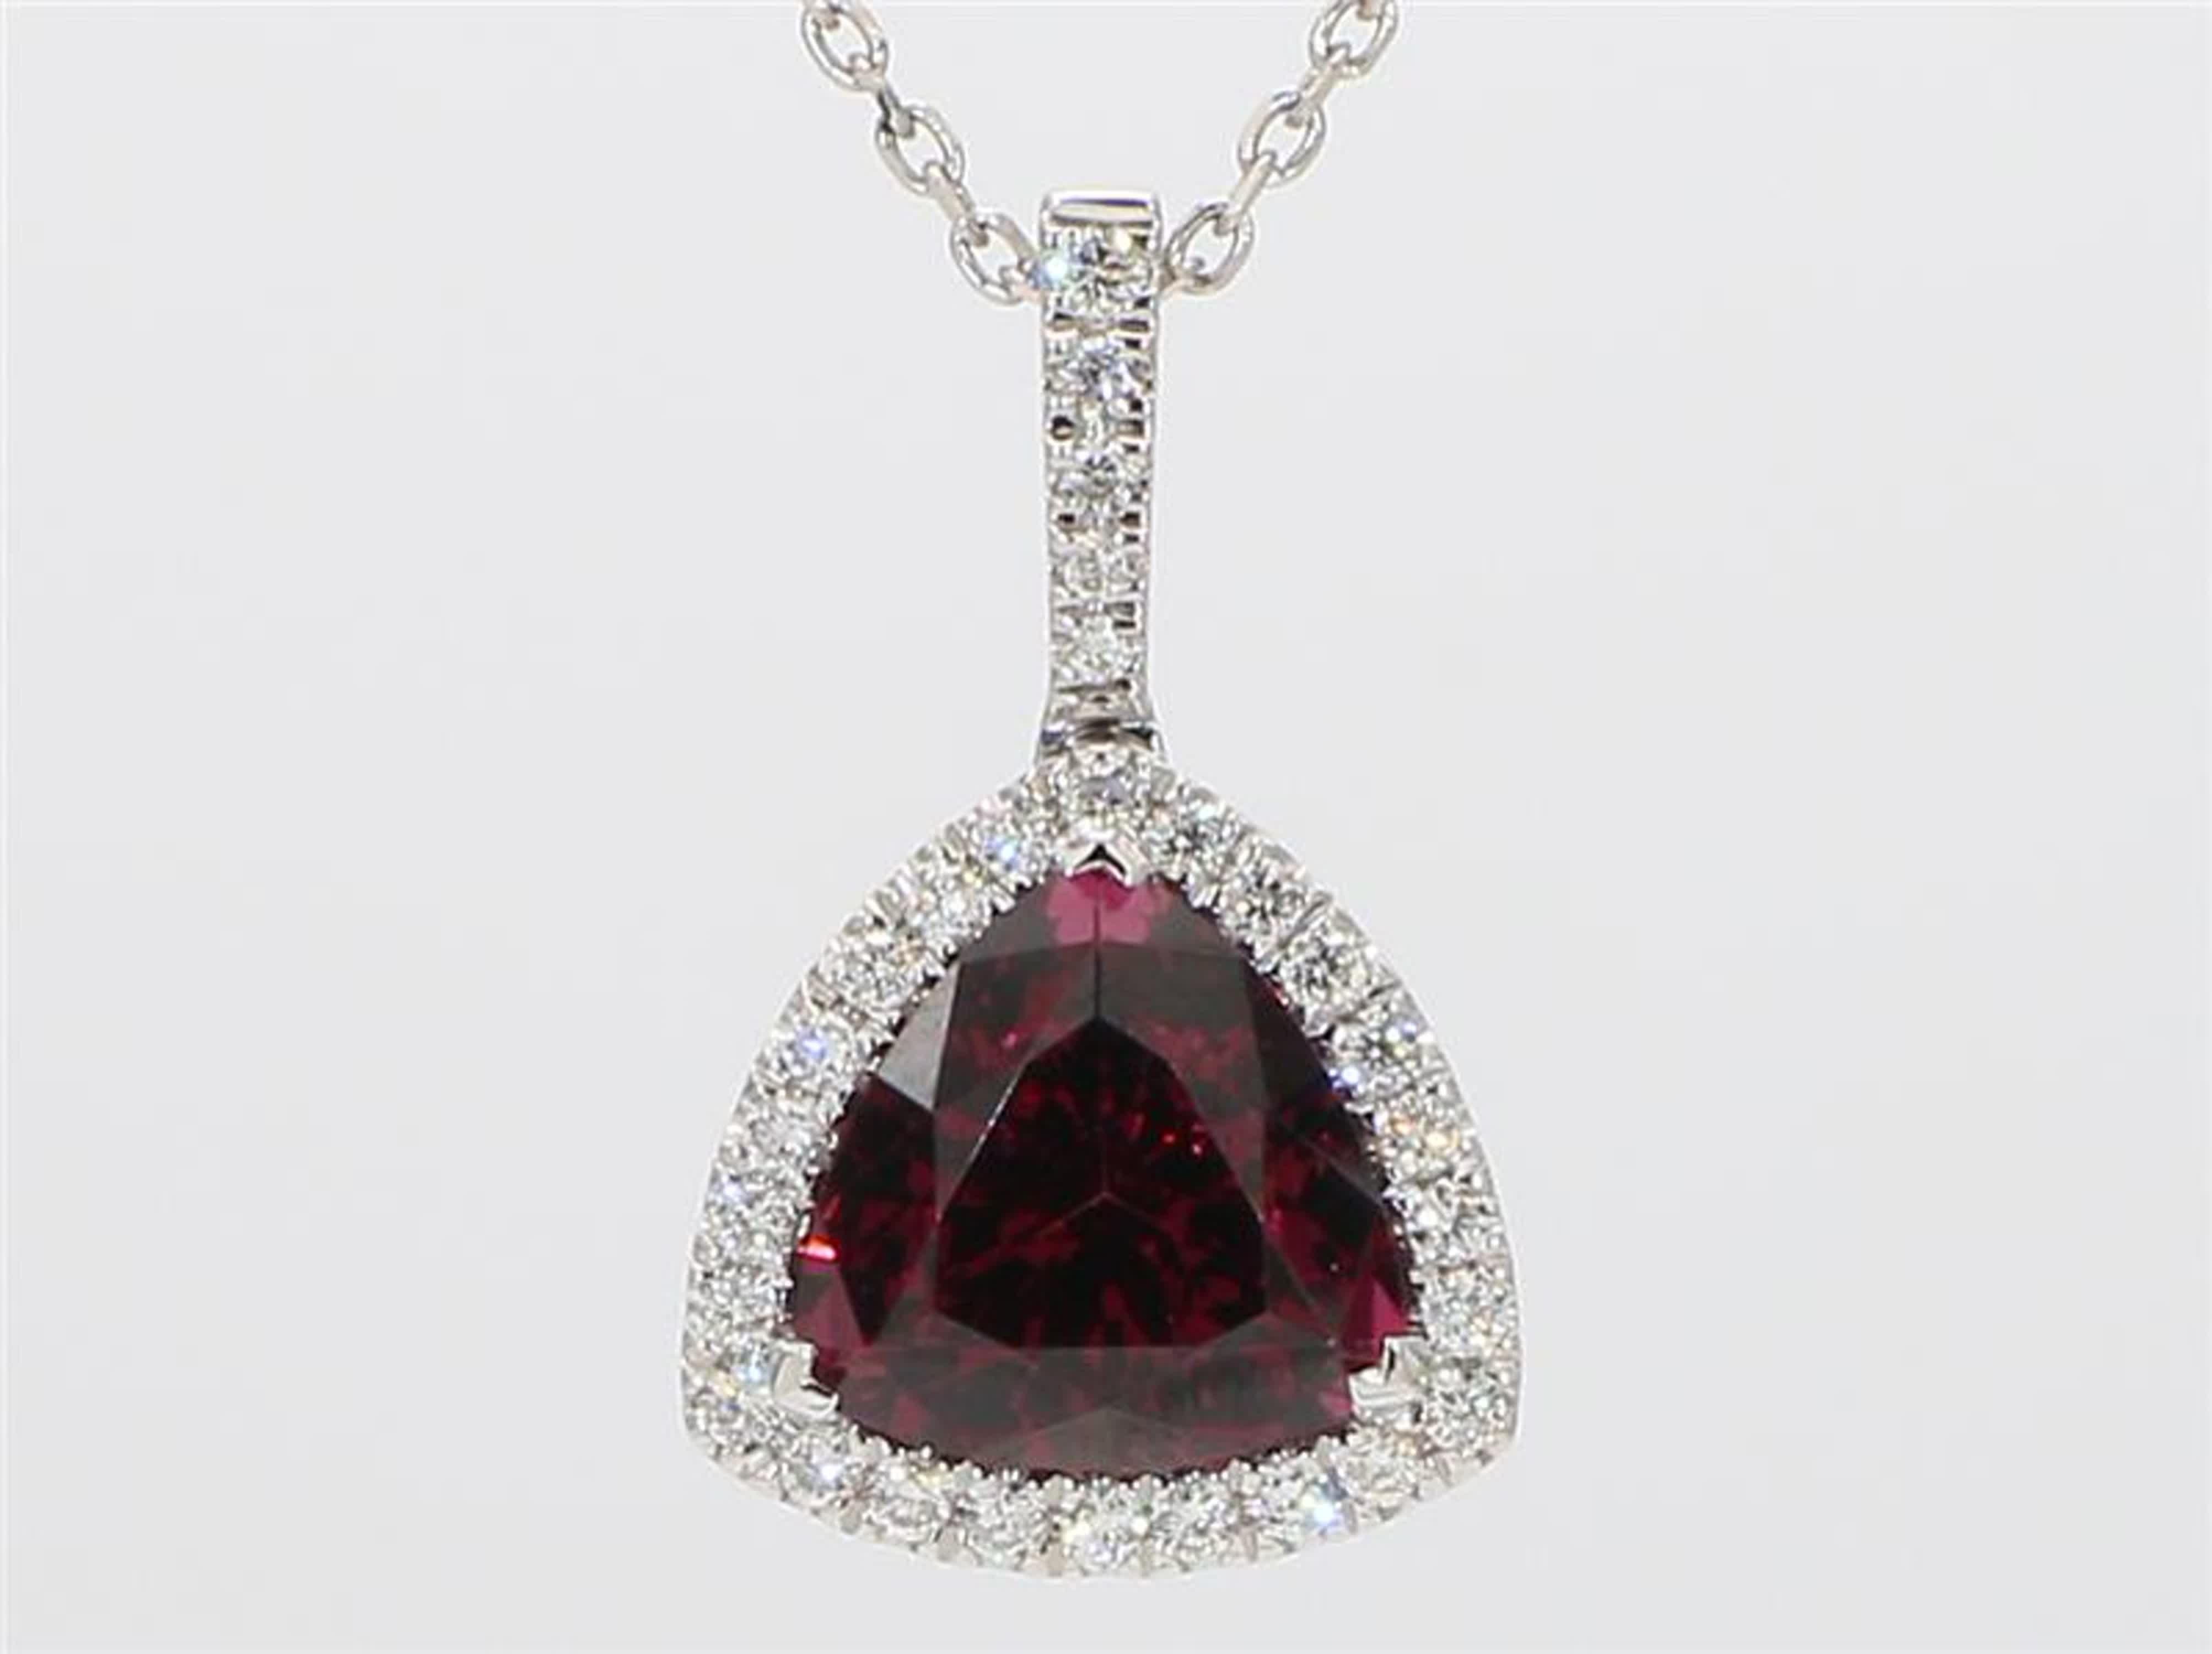 RareGemWorld's intriguing garnet pendant. Mounted in a beautiful 14K White Gold setting with a natural trilliant cut Rhodolite Garnet. The garnet is complimented by a natural round white diamond melee. This pendant is guaranteed to impress and